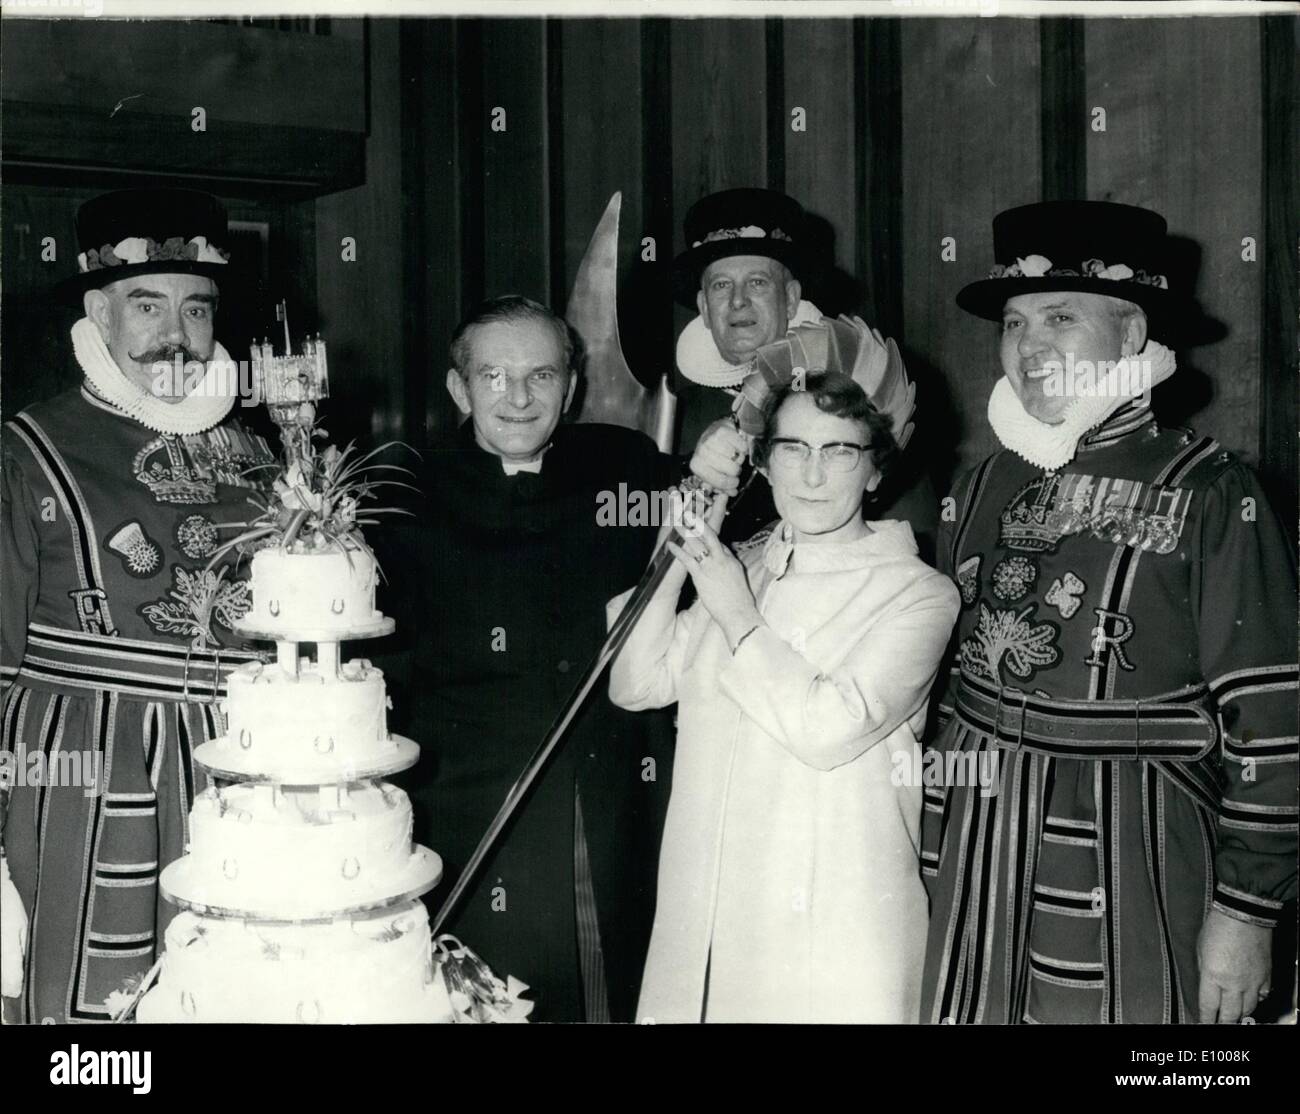 Jan. 01, 1972 - H.M Chaplain to the tower of London weds: Believed to be the first H.M Chaplin to be married while in office since the Tower of London was built the Rev. John G Nicholls was married today to Miss Dorothy Friend, of Carlton, Notingham, during the ceremony held in the Chapel Royal St. Peter Ad Vinculs, inside the Tower of London. Photo shows Watched by Yeoman Warders of the Tower of London, the Rev. John G. Nicholls and his bride Dorothy cut the wedding cake at the reception held at nearby Bakers Hall. Stock Photo